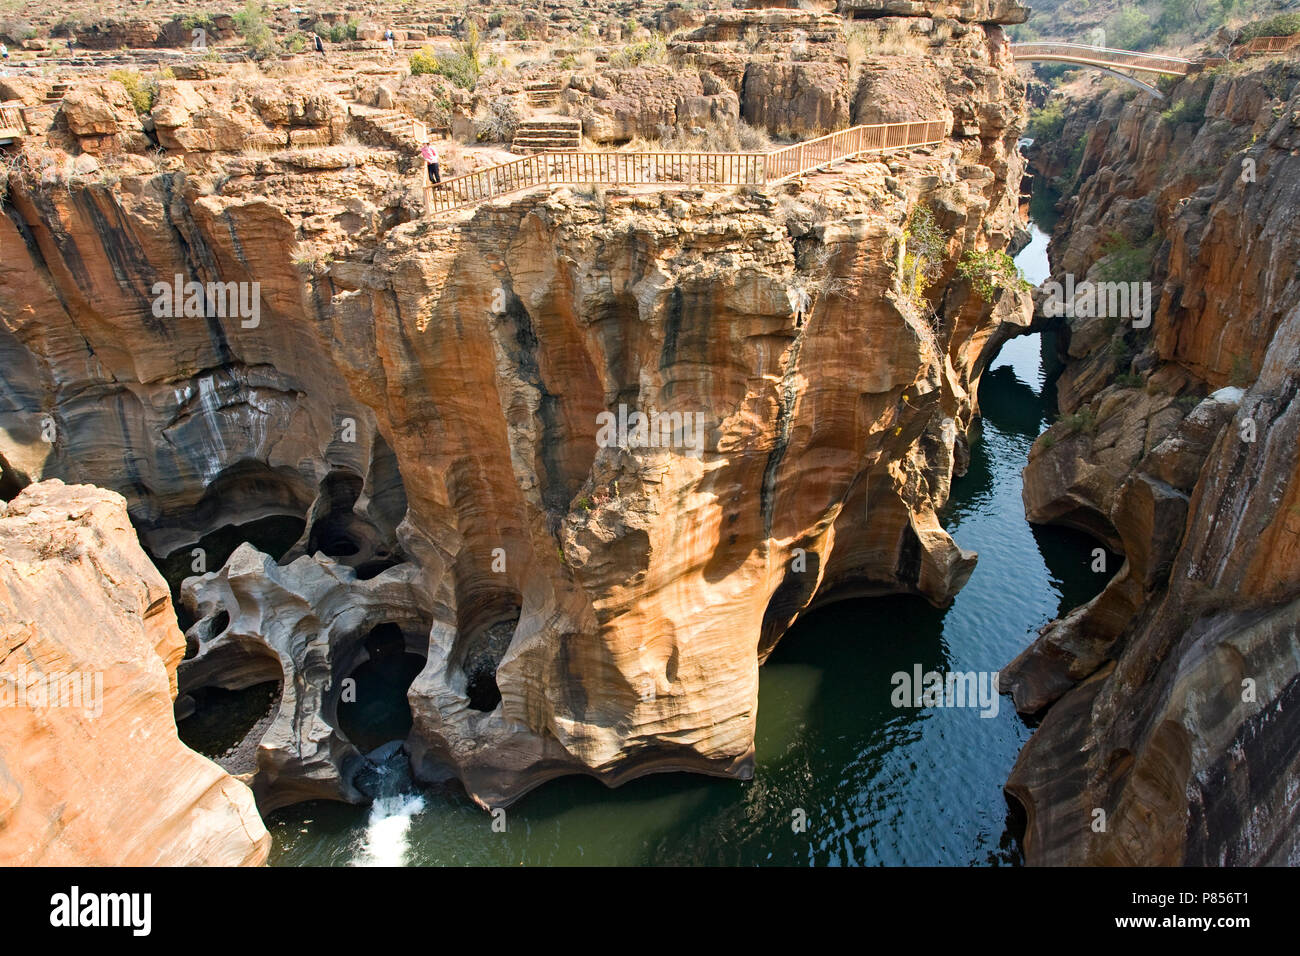 Bourke's Luck Potholes, Blyde River Canyon, South-Africa / Zuid-Afrika Stock Photo